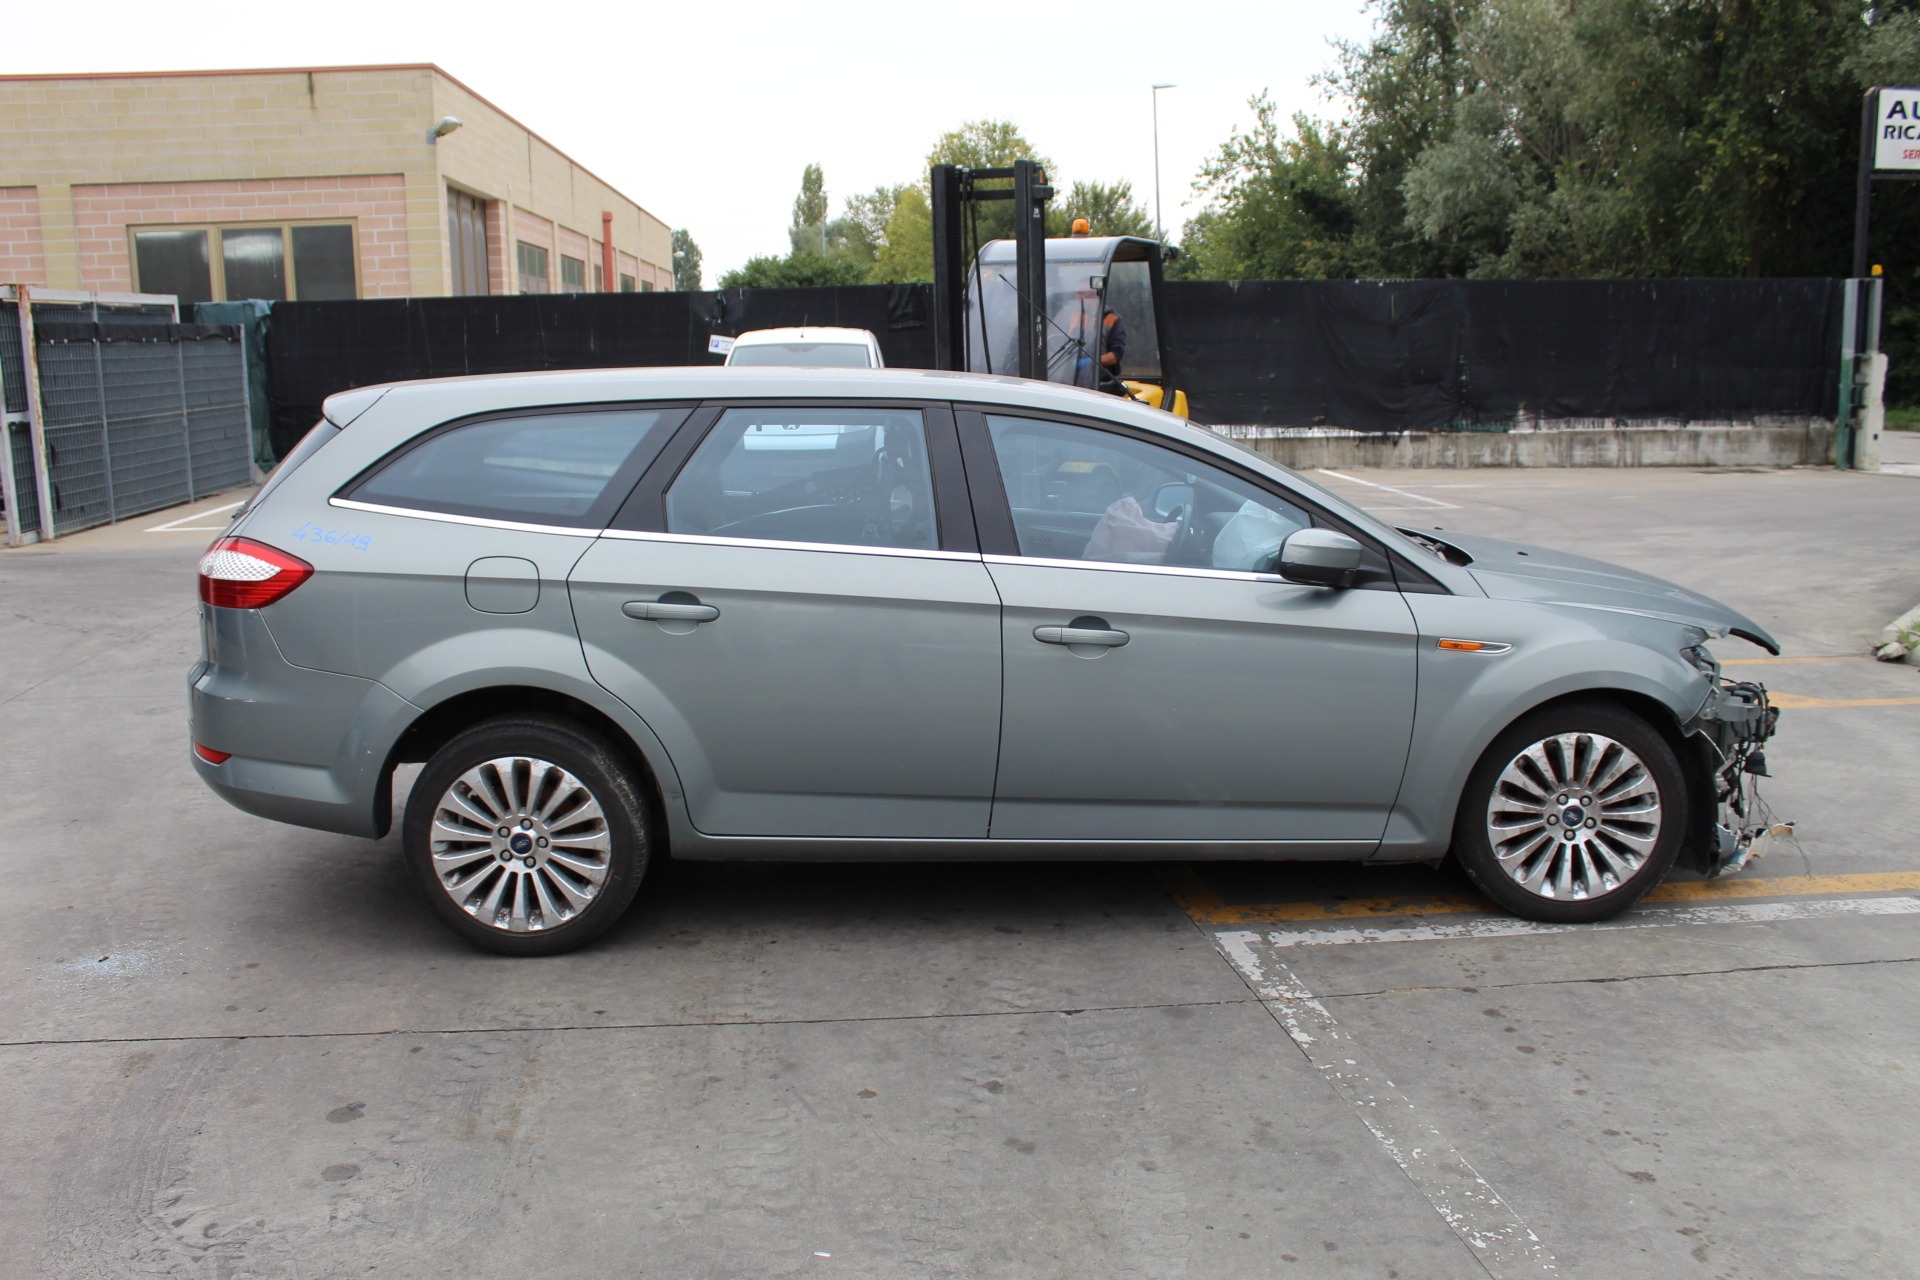 FORD MONDEO 2.0 103KW 5P D 6M (2008) RICAMBI IN MAGAZZINO